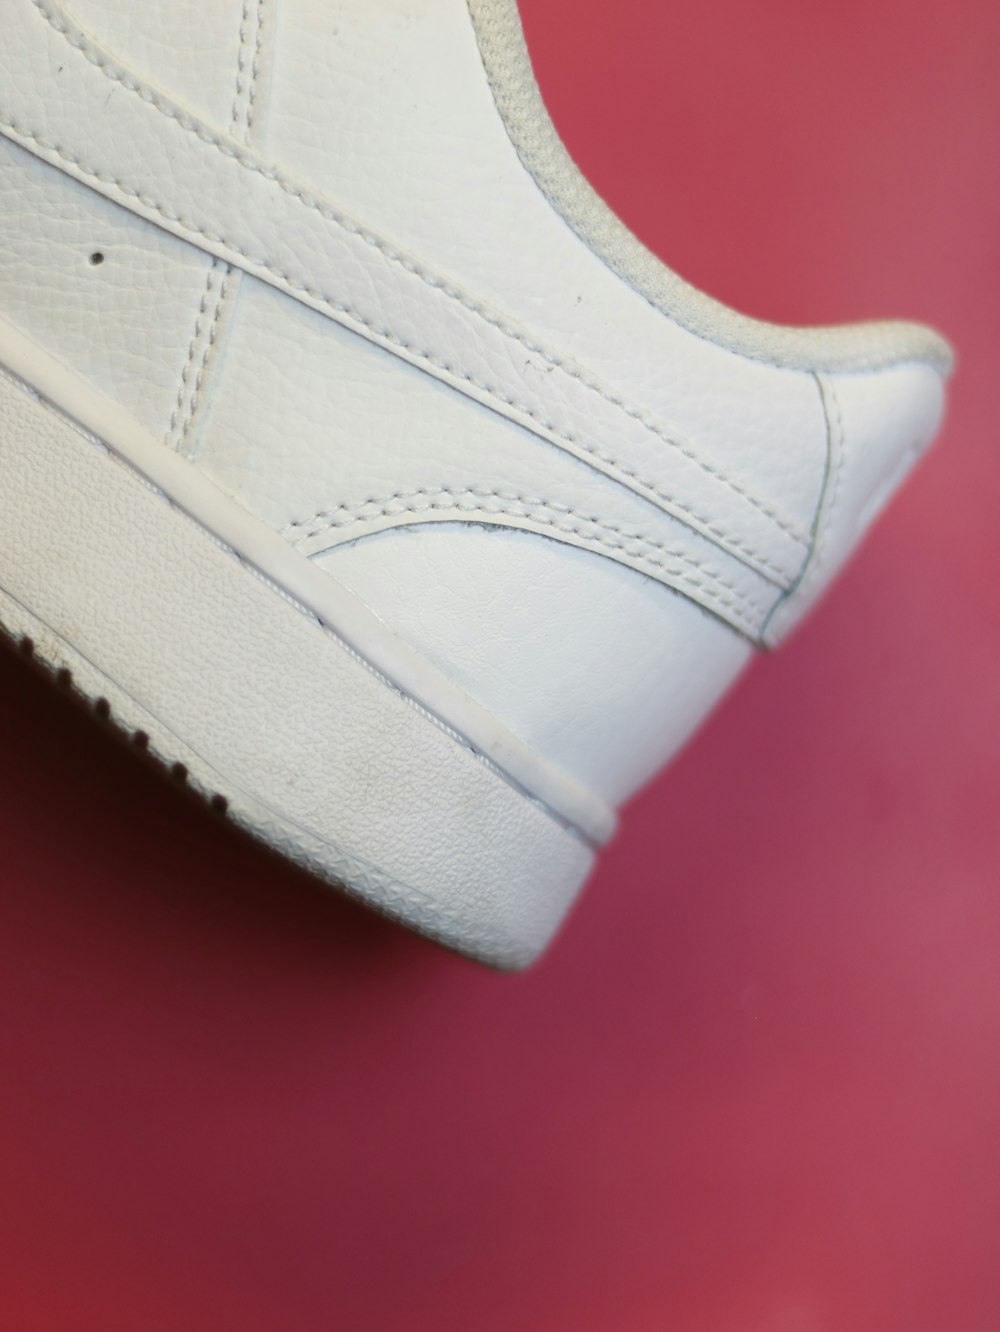 a close up of a white tennis shoe on a red surface